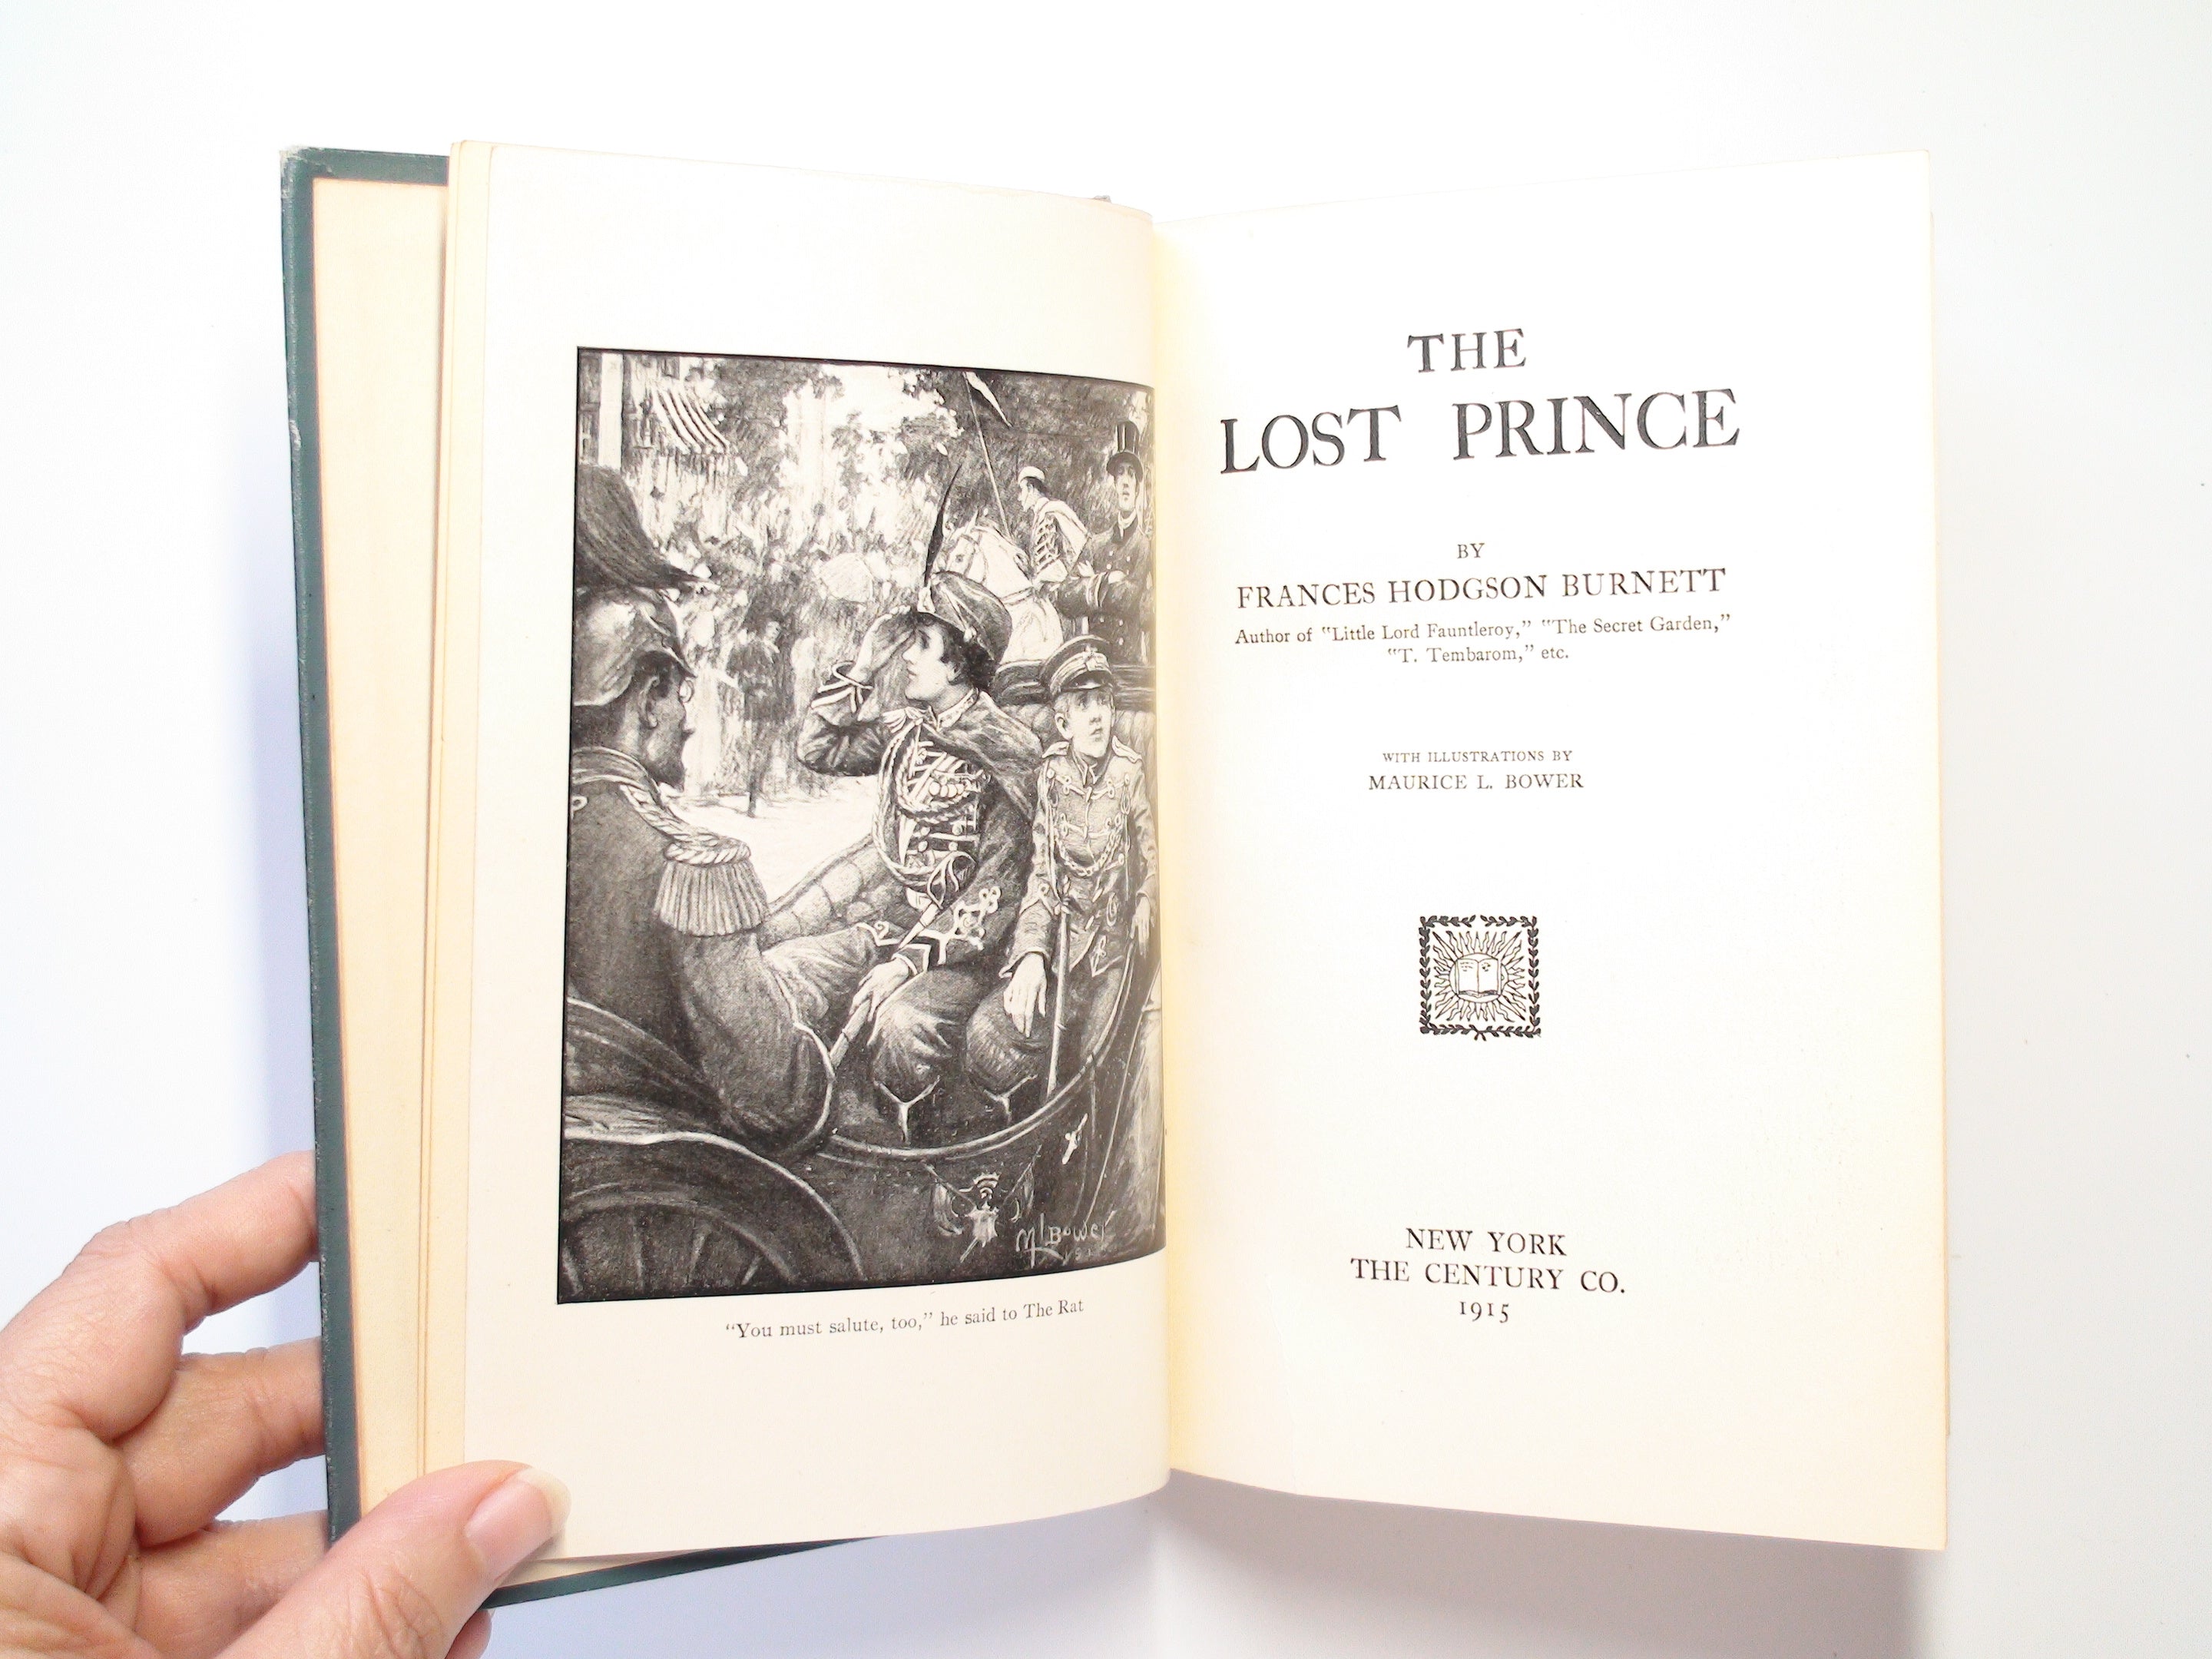 The Lost Prince, by Frances Hodgson Burnett, Illustrated Maurice L. Bower, 1915